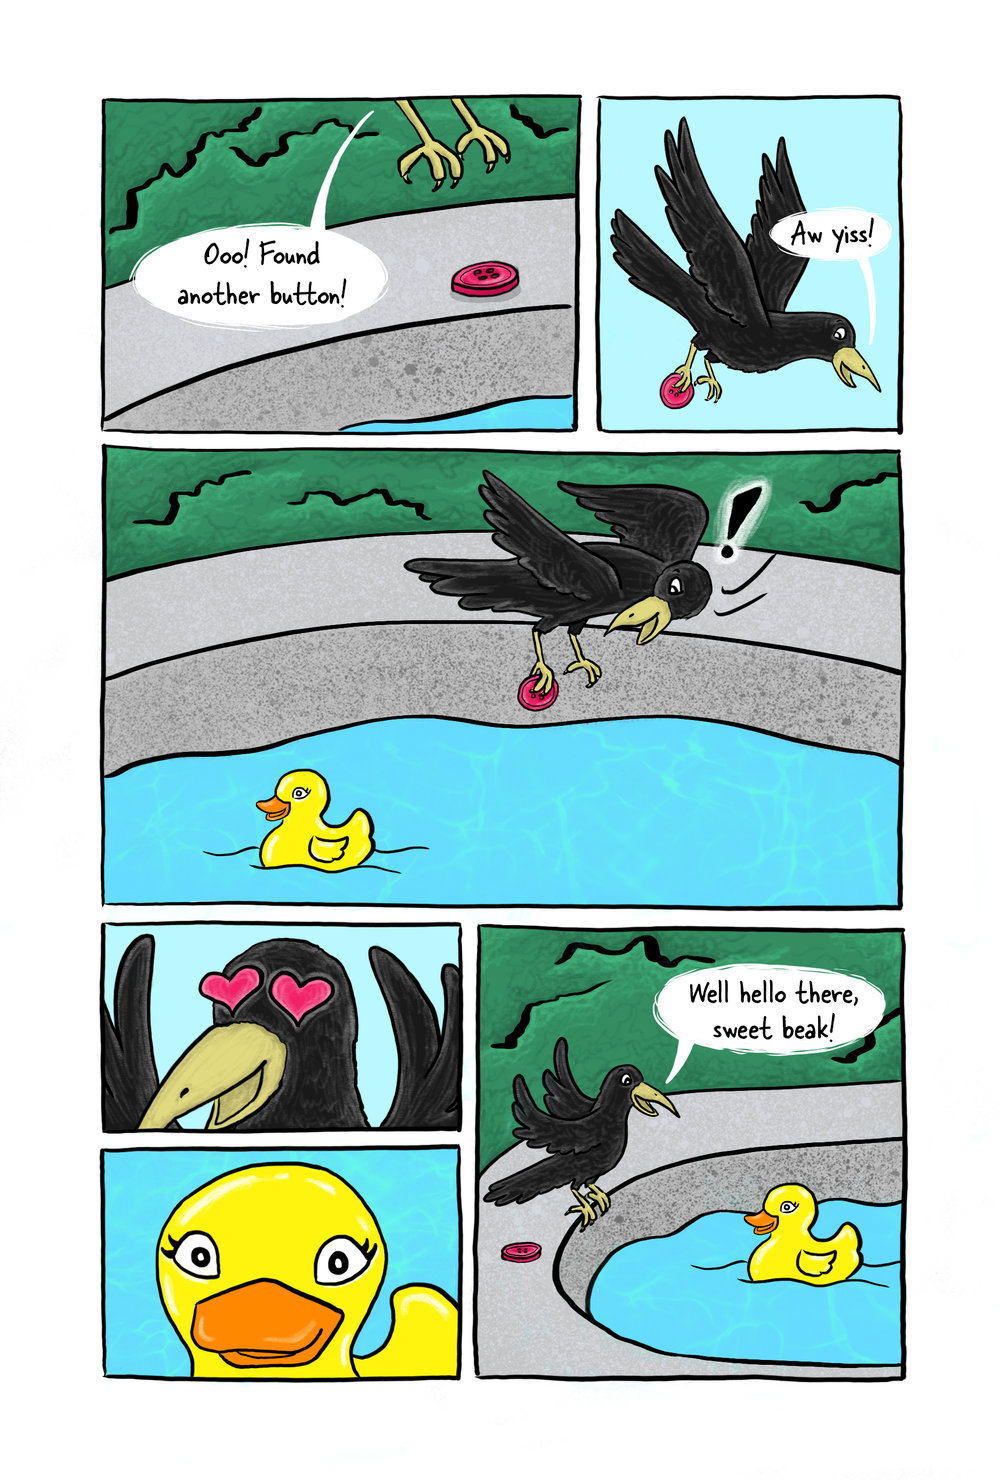 Page 1 Mr. Buttons finds a button and meets a hot tub chlorinator shaped like a yellow duck